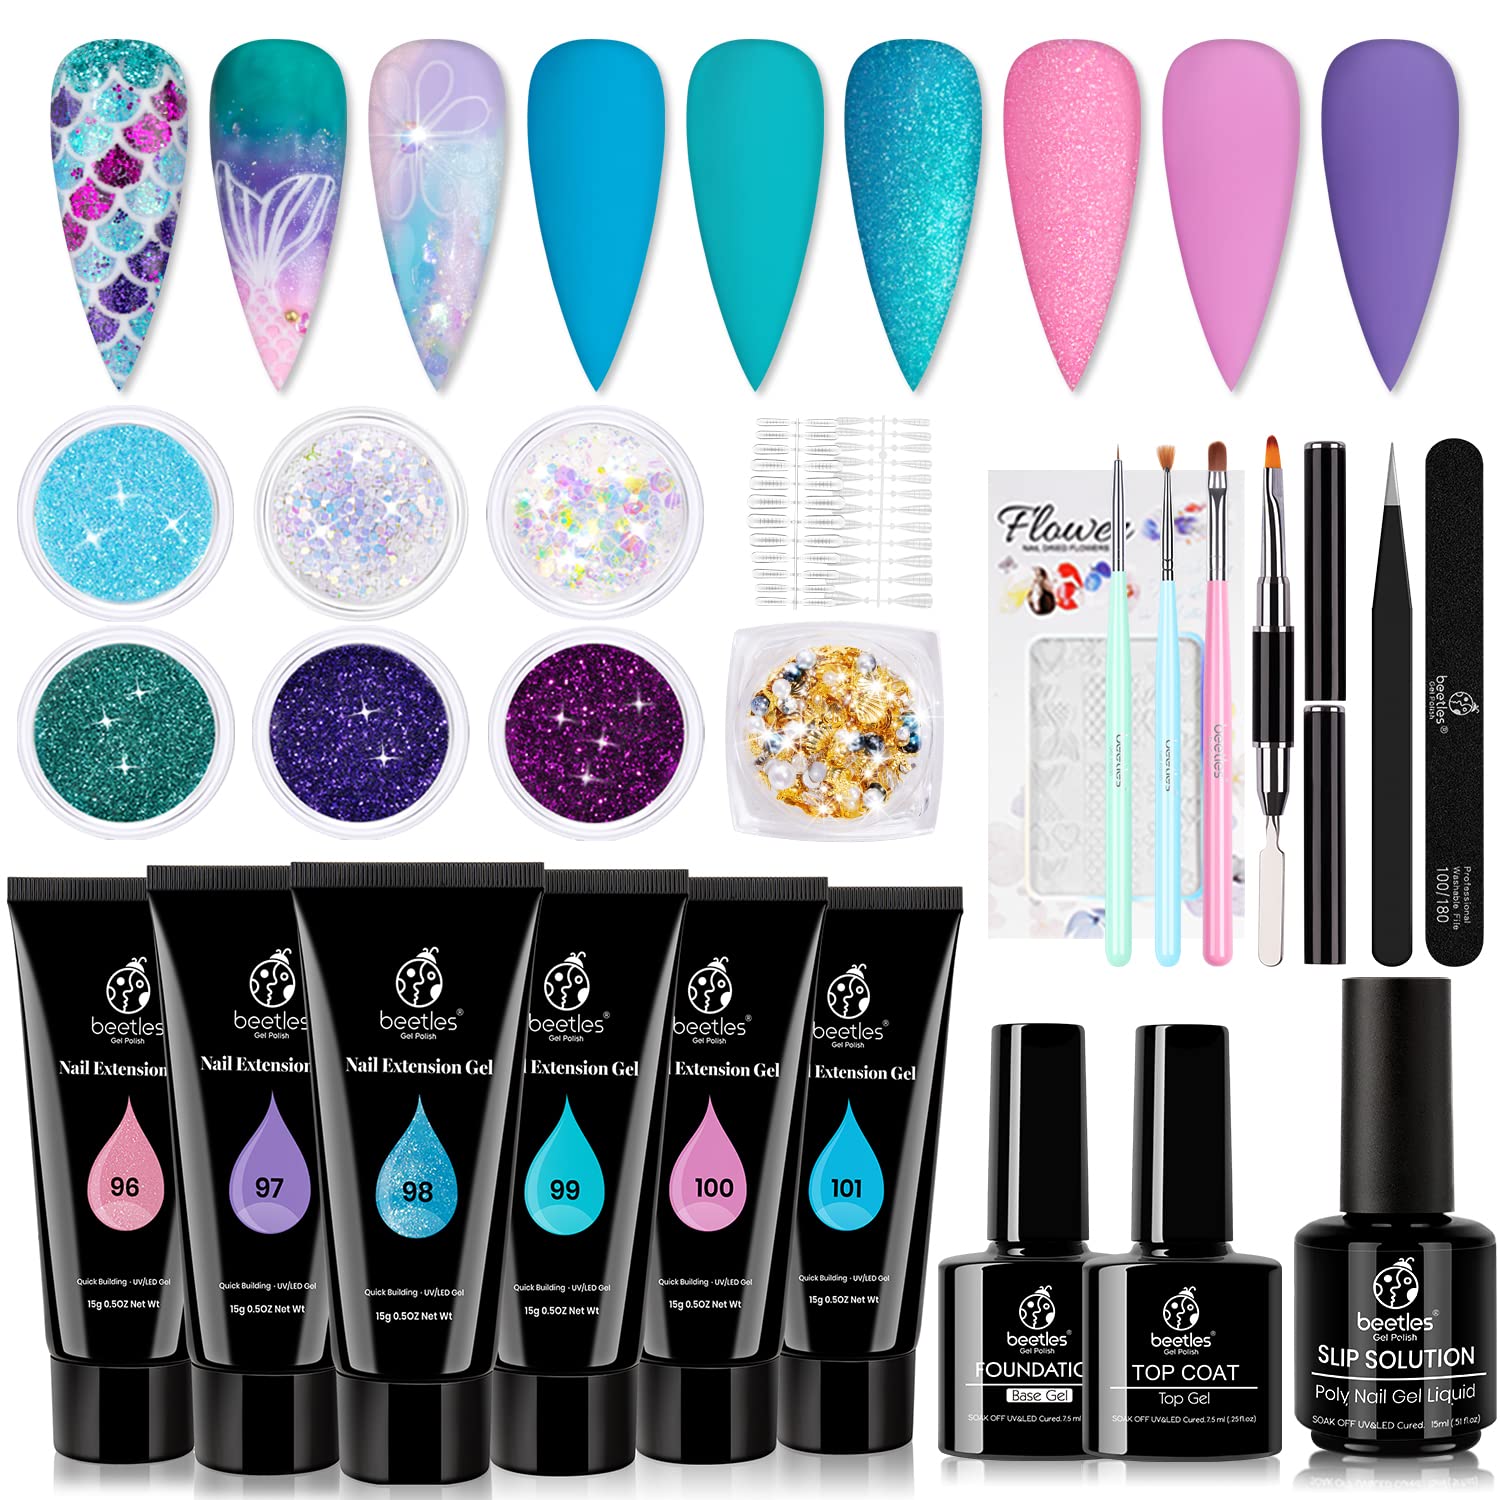 universitetsstuderende Chaiselong ting Beetles Poly Nail Extension Gel Kit, Mermaid 6 Colors Builder Extension Gel  with Slip Solution Rhinestone Glitters, Blue Purple Pink All In One Poly  Nail Enhancement Manicure Kit Easy DIY Nail